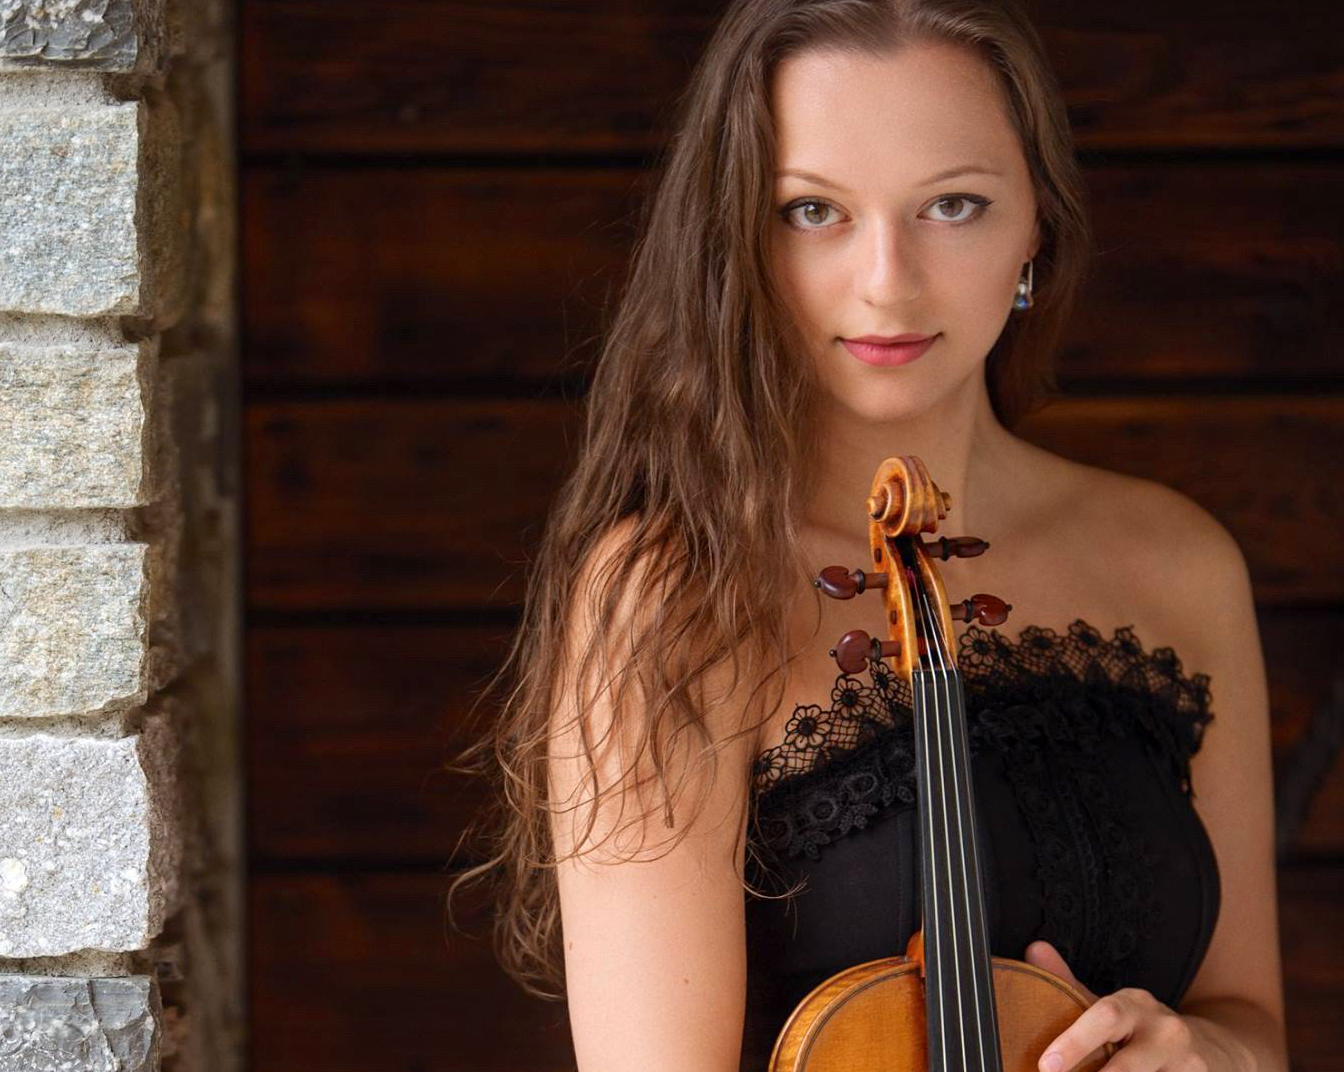 RUSSIAN SOULS, AMERICAN ACCENTS: Symphony to feature homegrown violinist in all-Russian program